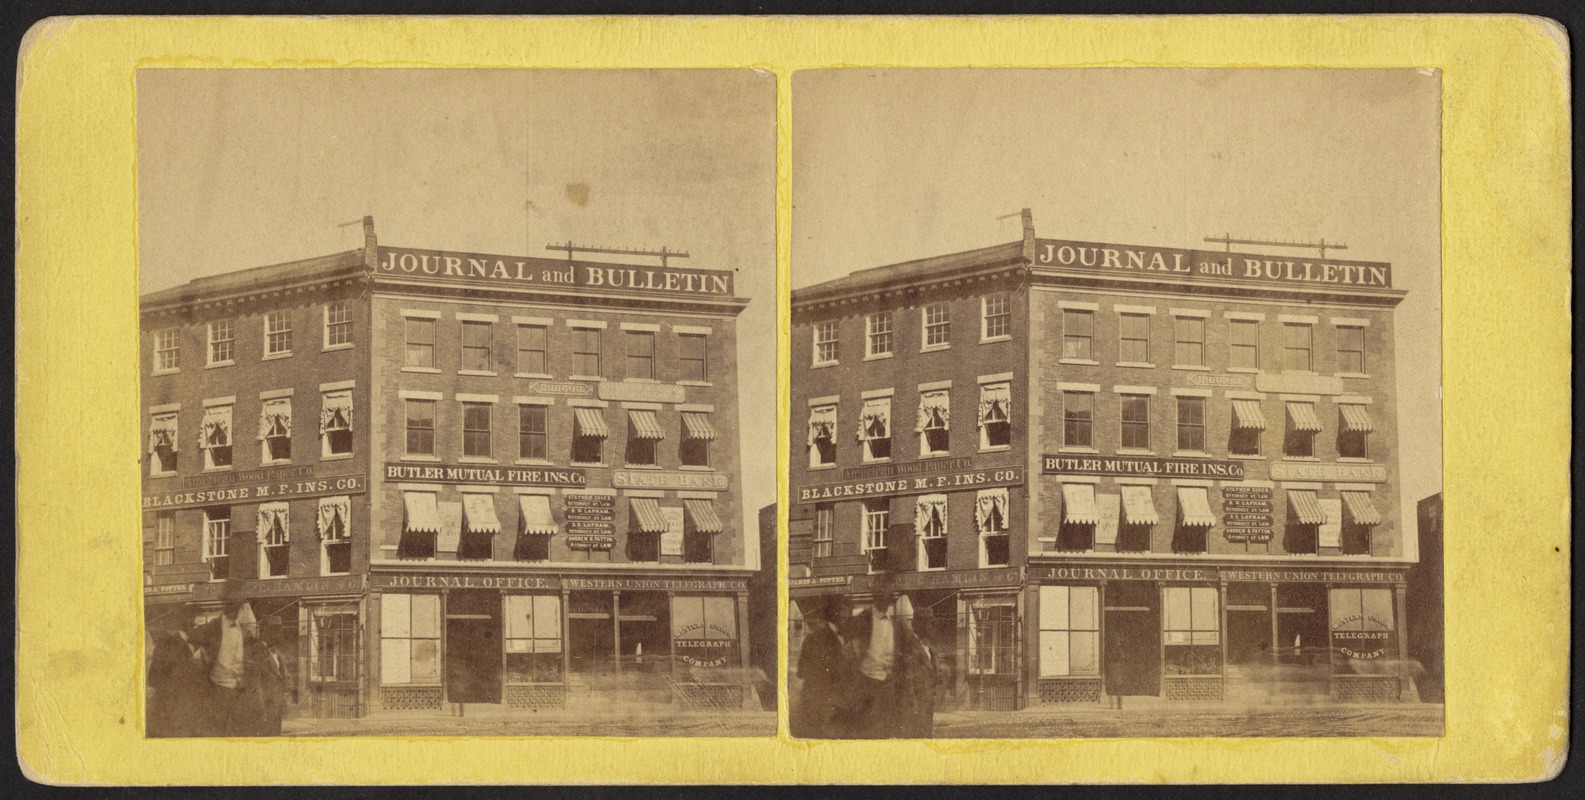 Journal and Bulletin building containing the offices of State Bank, Butler Mutual Fire Insurance Co., Western Union Telegraph, and other companies